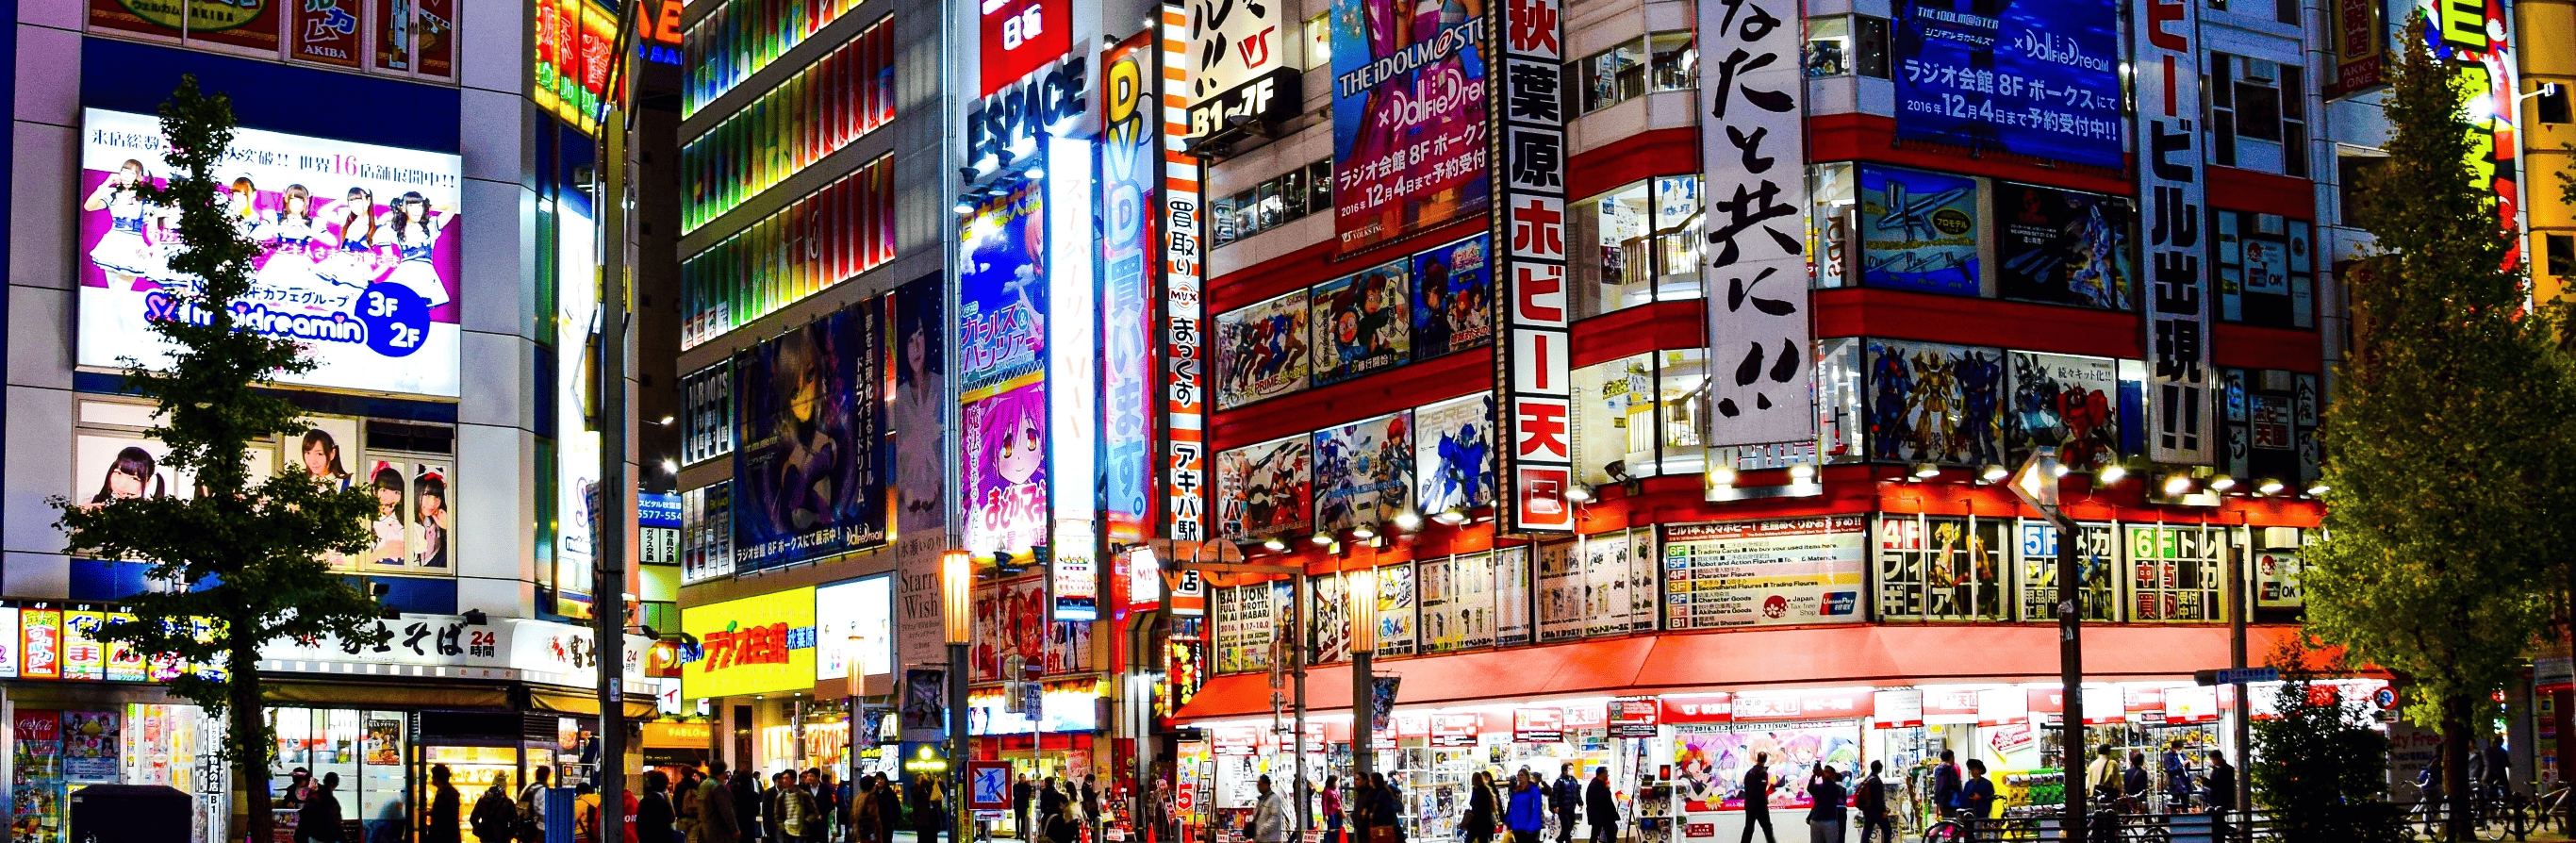 A bustling street scene at night in an urban area with bright neon signs and advertisements, crowded with pedestrians traveling across Japan.